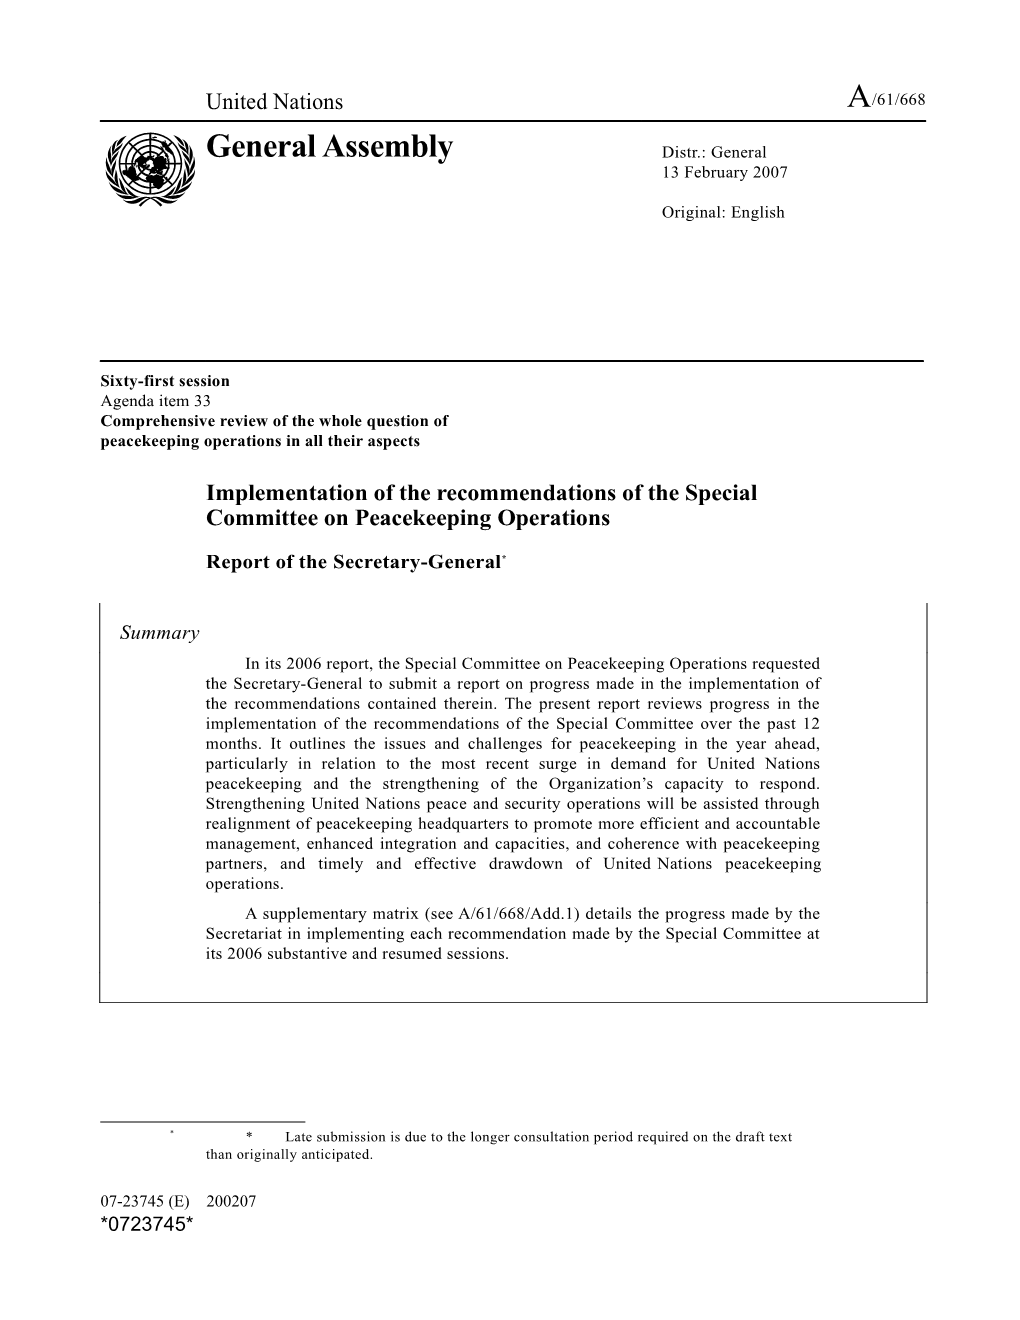 Implementation of the Recommendations of the Special Committee on Peacekeeping Operations